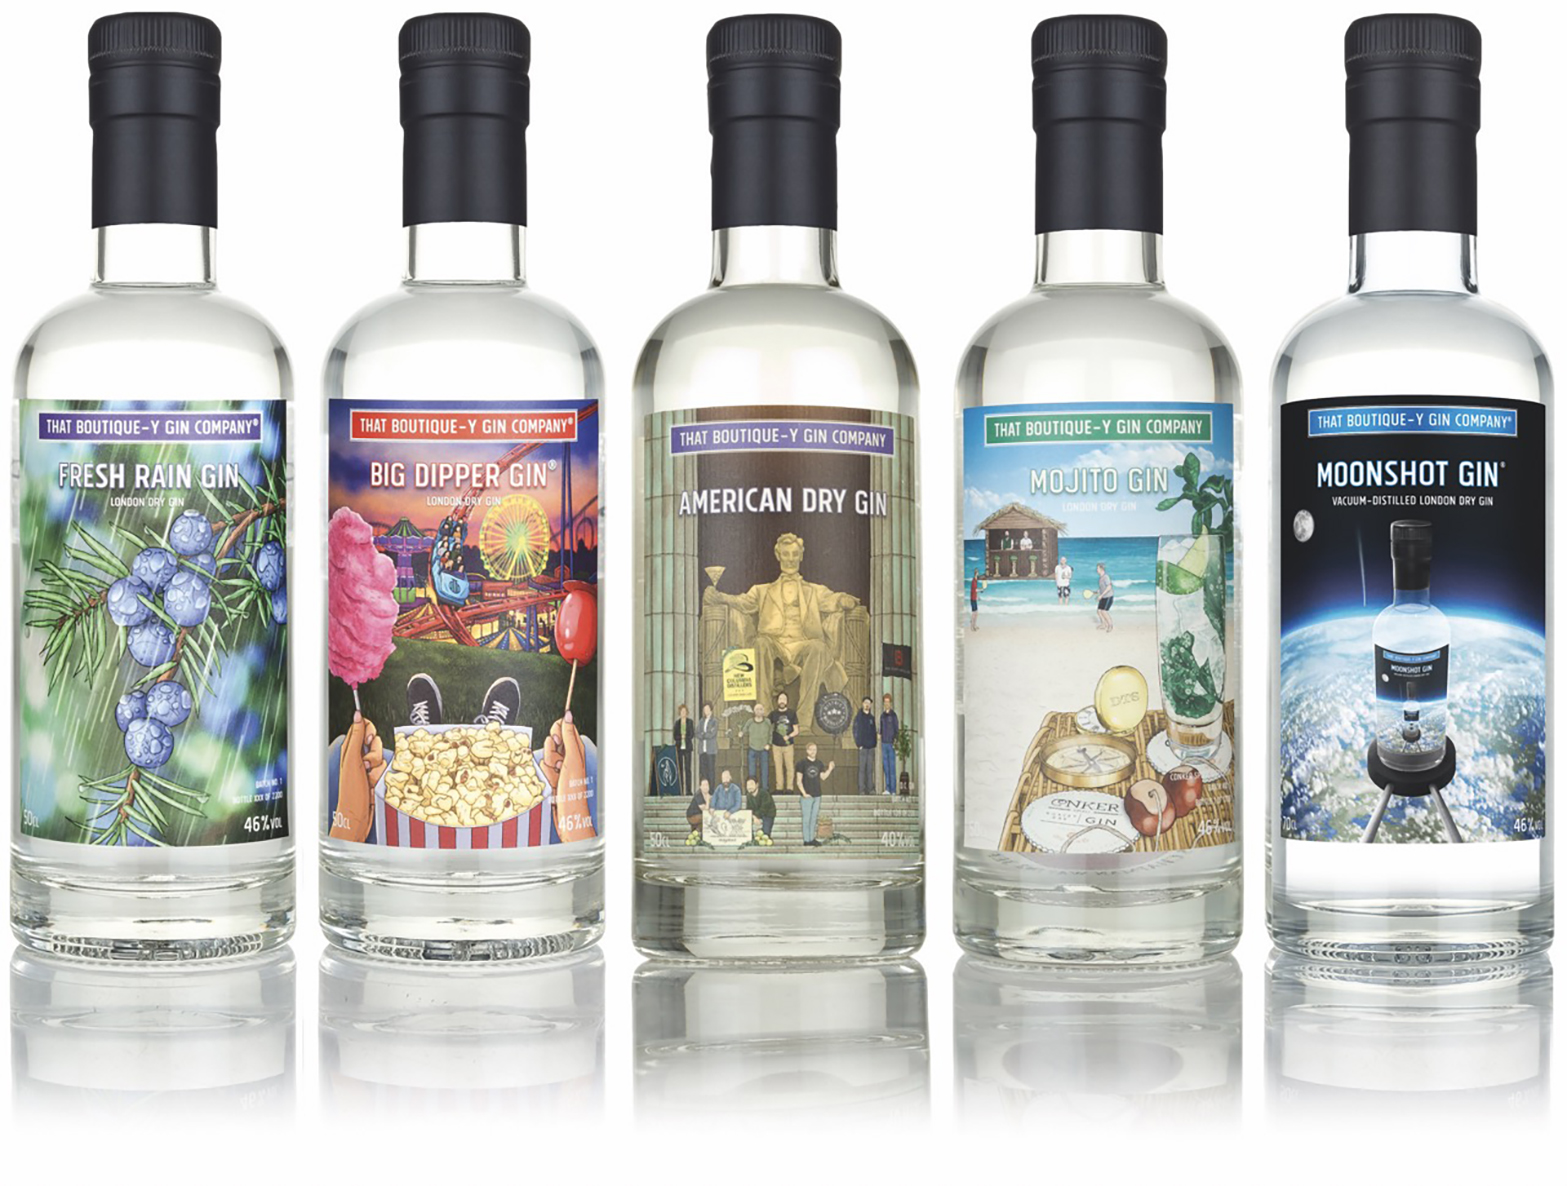 A selection of bottlings from That Boutique-y Gin Company